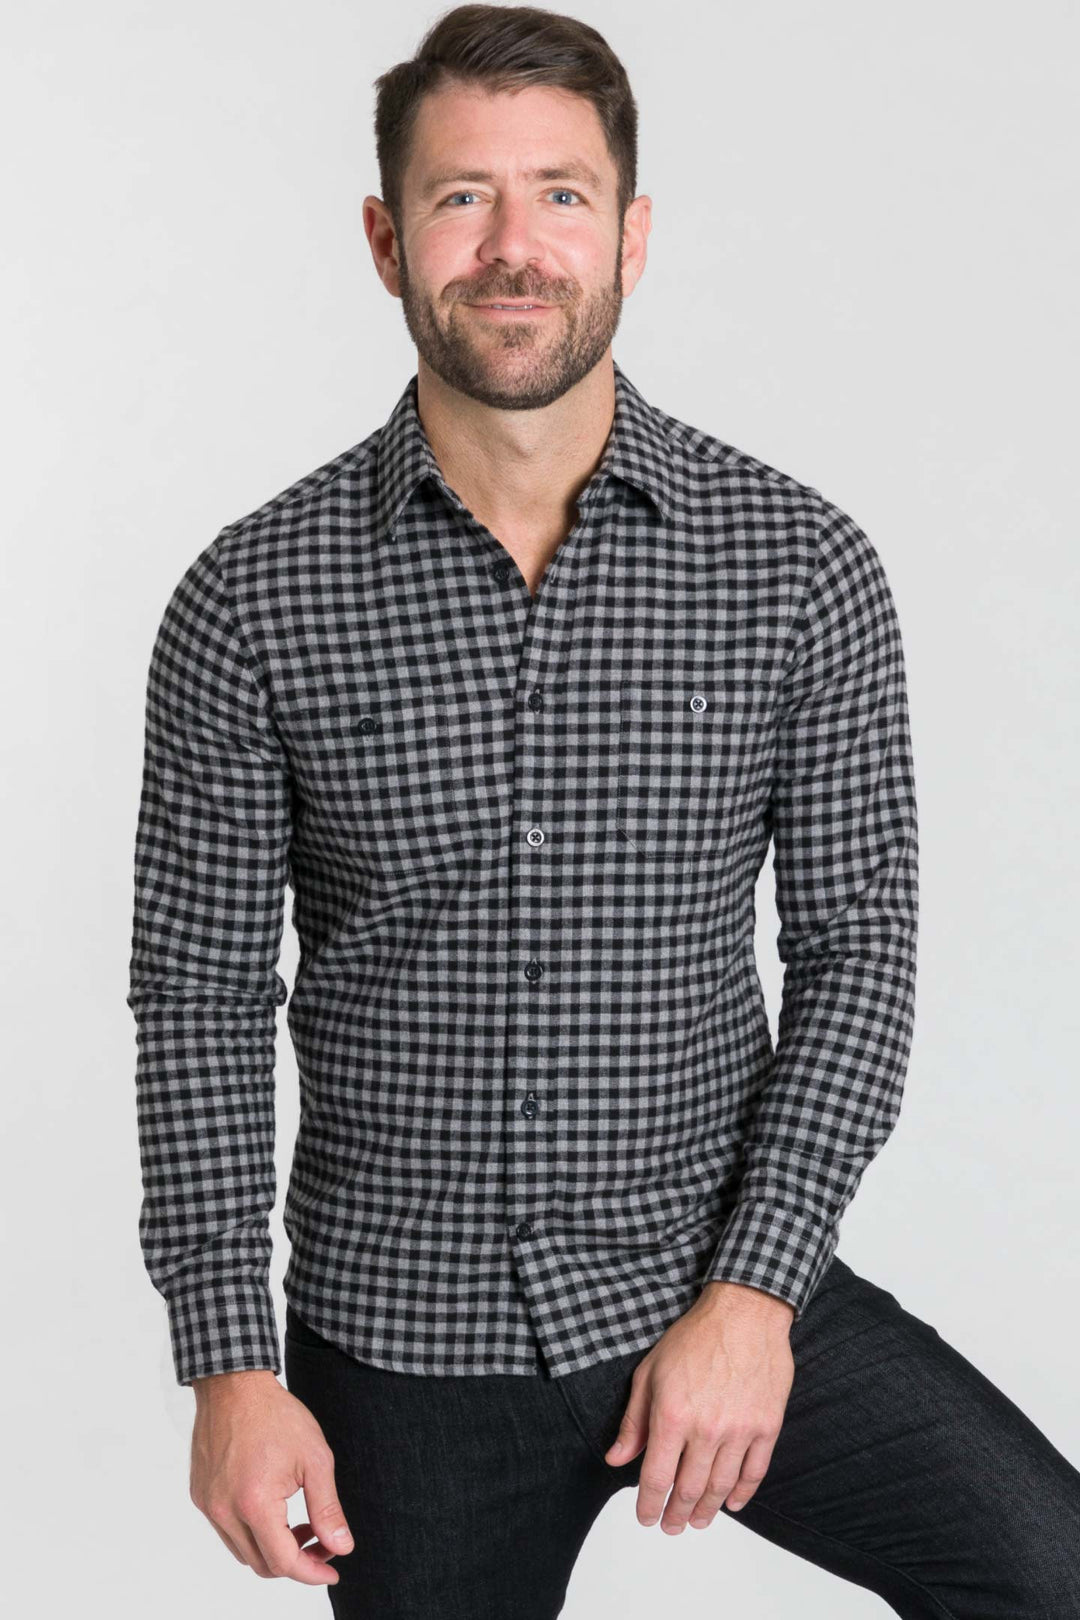 Buy Eclipse Gingham Flannel Button-Down Shirt for Short Men | Ash & Erie   Flannel Everyday Shirt